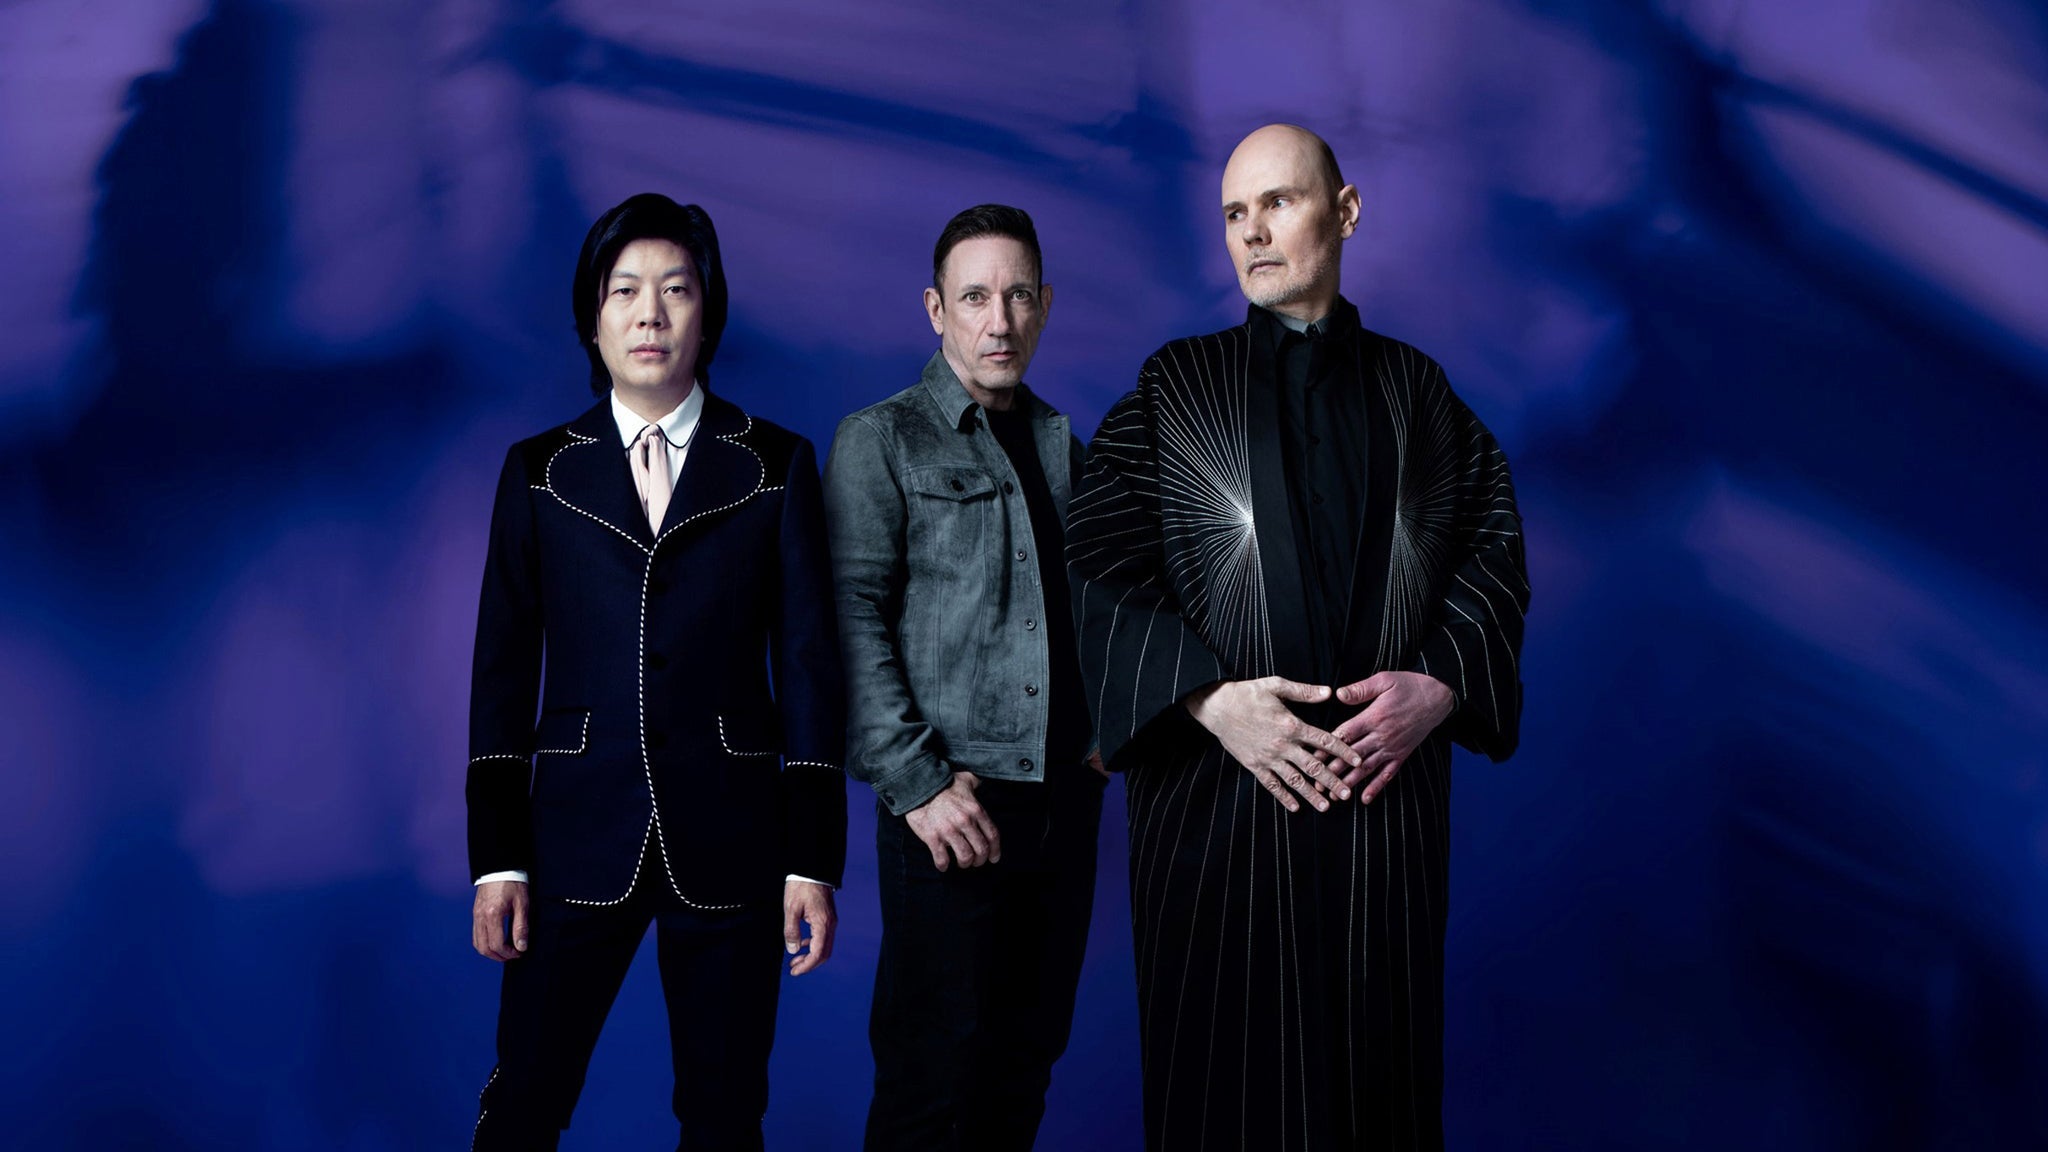 The Smashing Pumpkins: The World Is A Vampire Tour